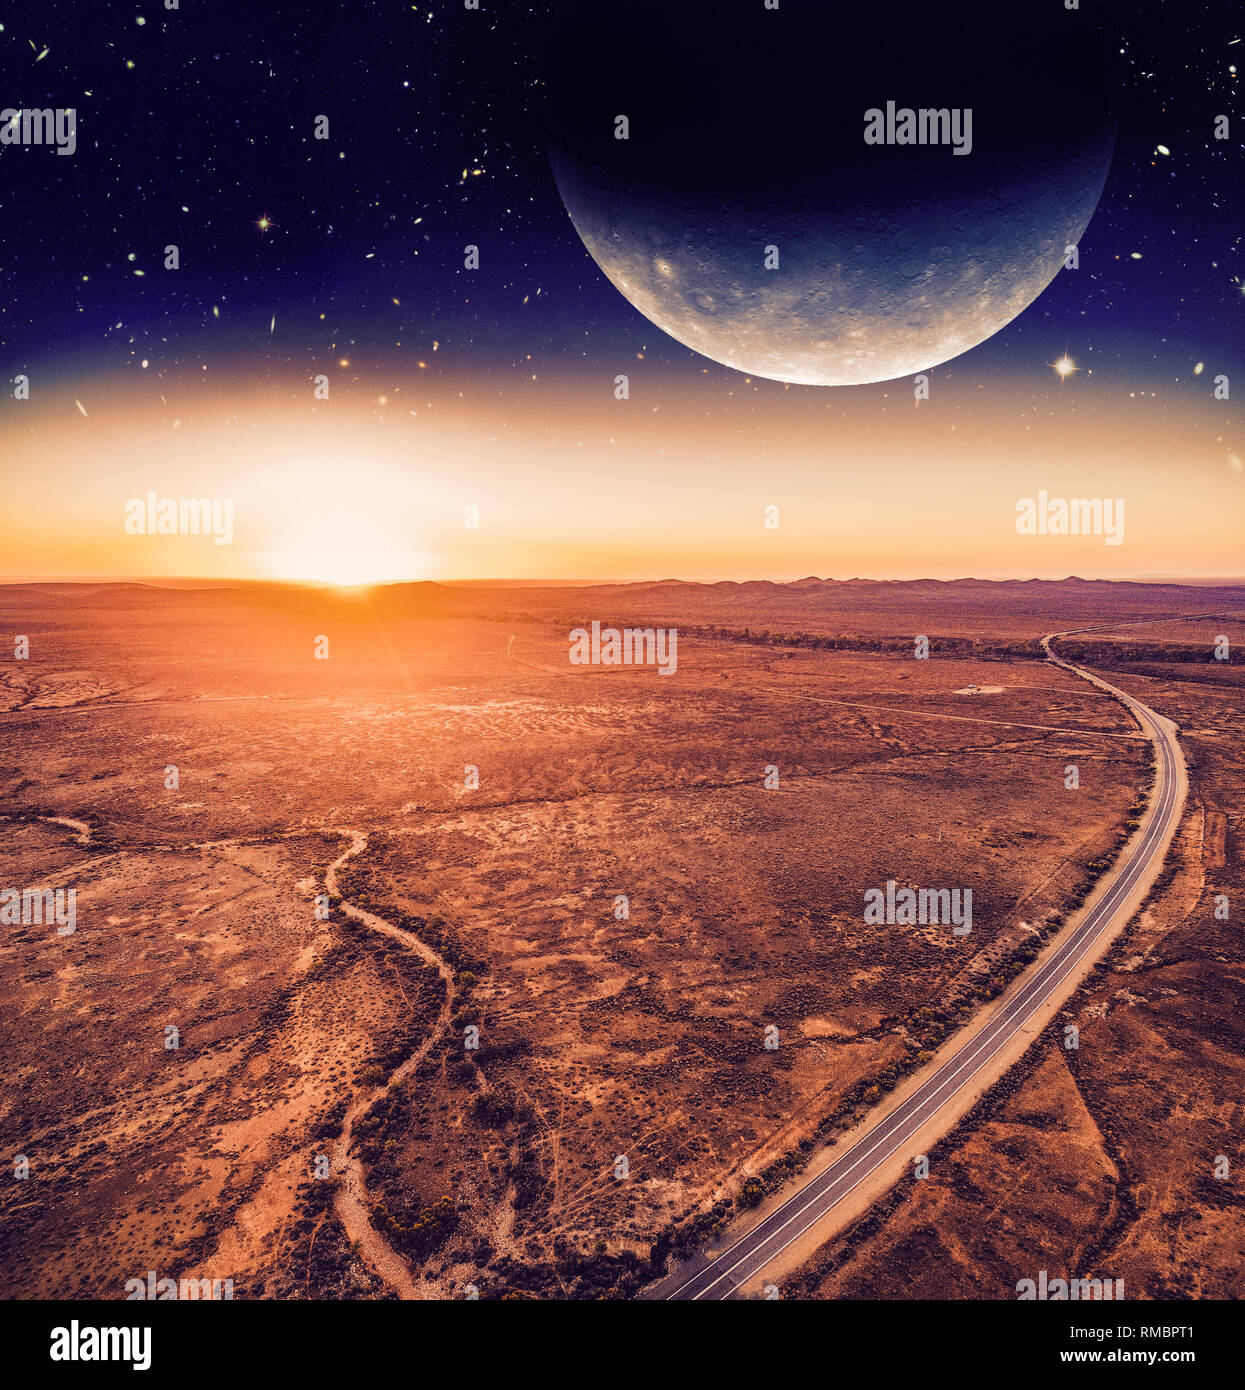 Unreal landscape - dark planet over road winding through desert landscape at sunset. Elements of this image are furnished by NASA Stock Photo